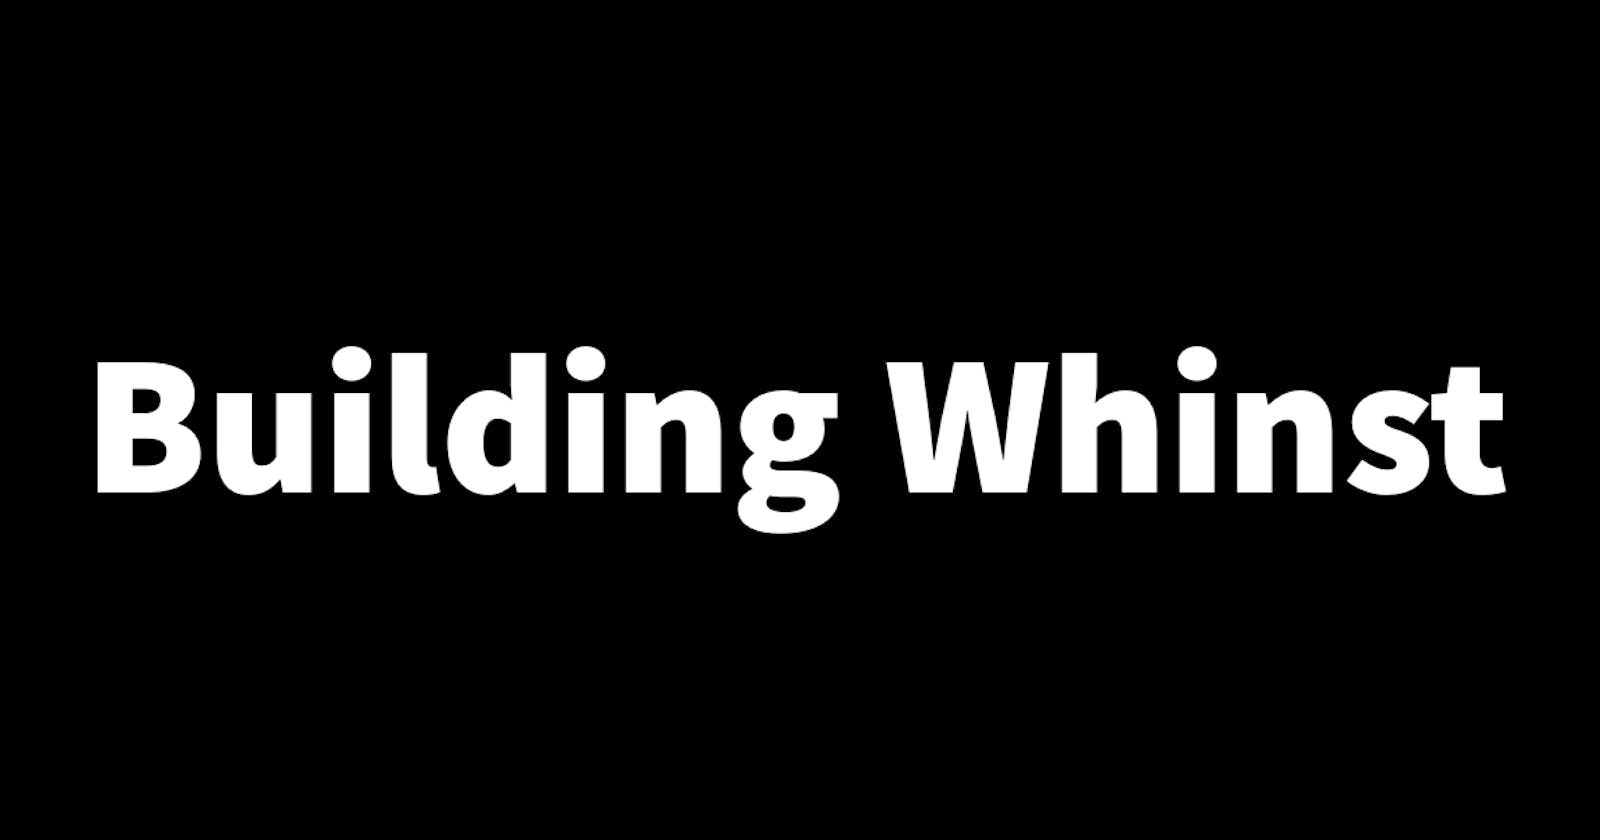 Building Whinst Part 4: Setting up the development environment and creating the project.